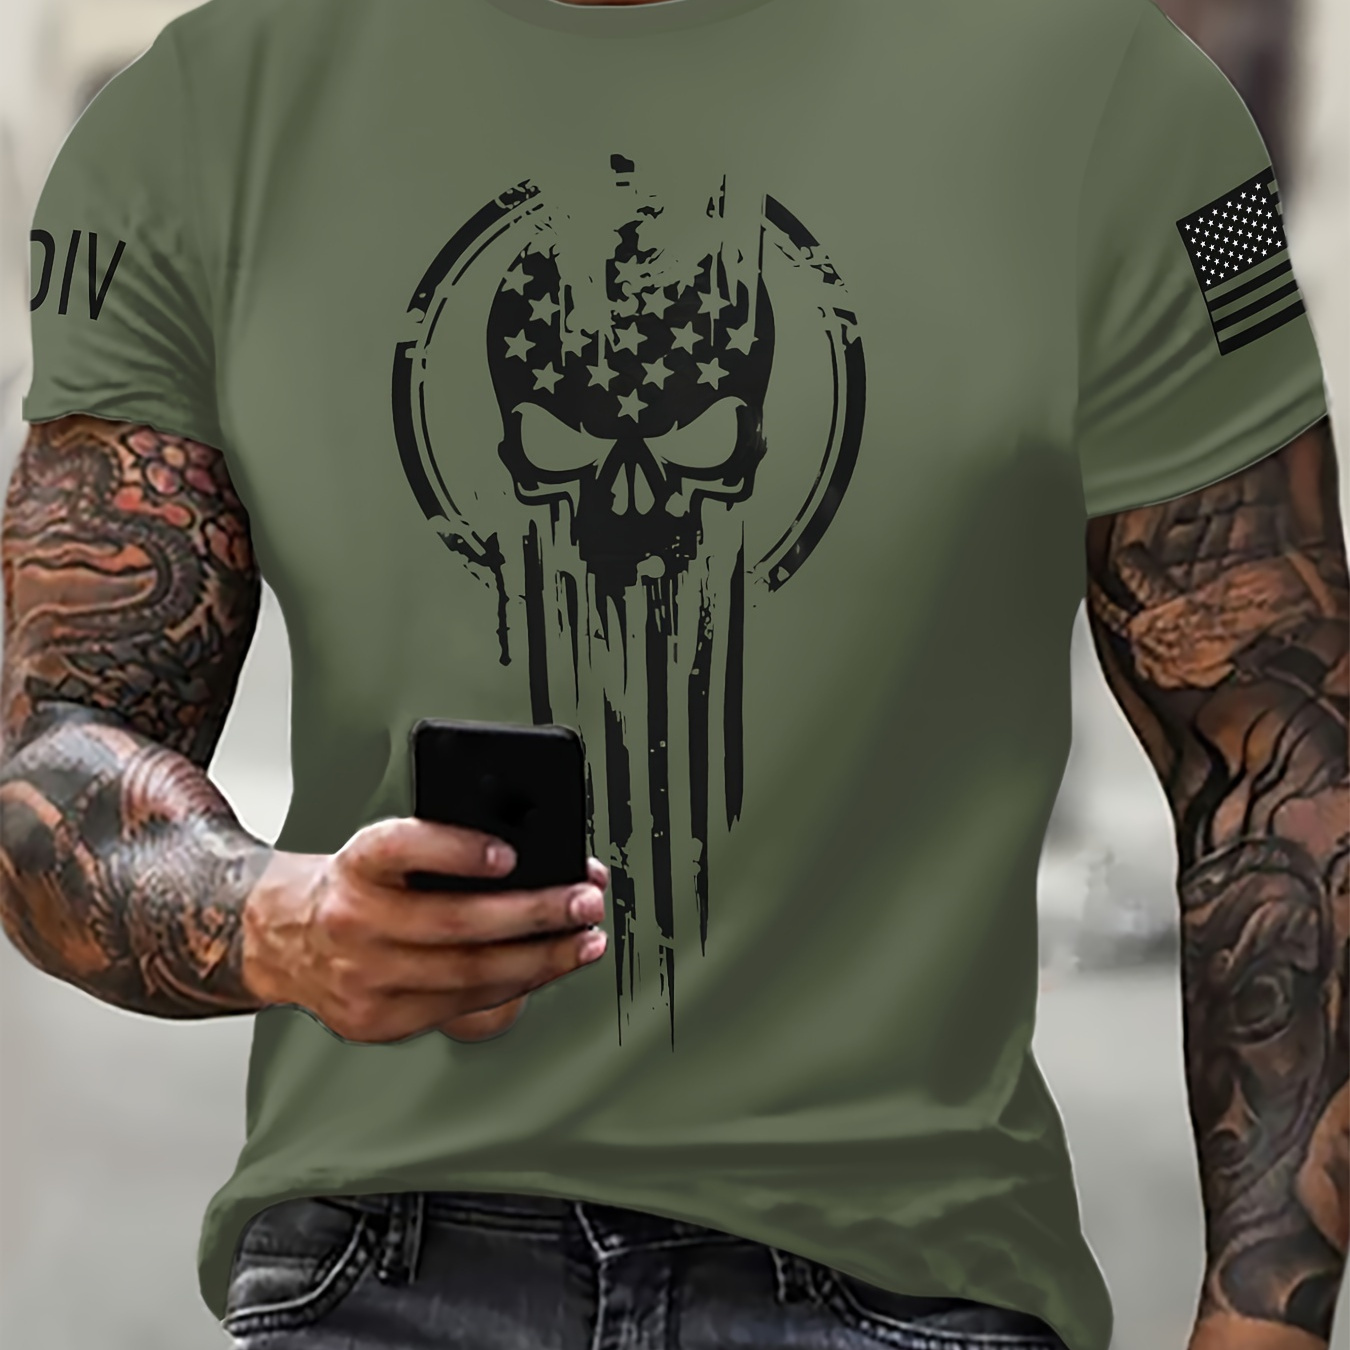 

Skeleton Skull And American Flag Pattern T-shirt With Crew Neck And Short Sleeve, Casual And Stylish Tops For Men's Summer Outdoors Wear, Independence Day Theme Tees For Men